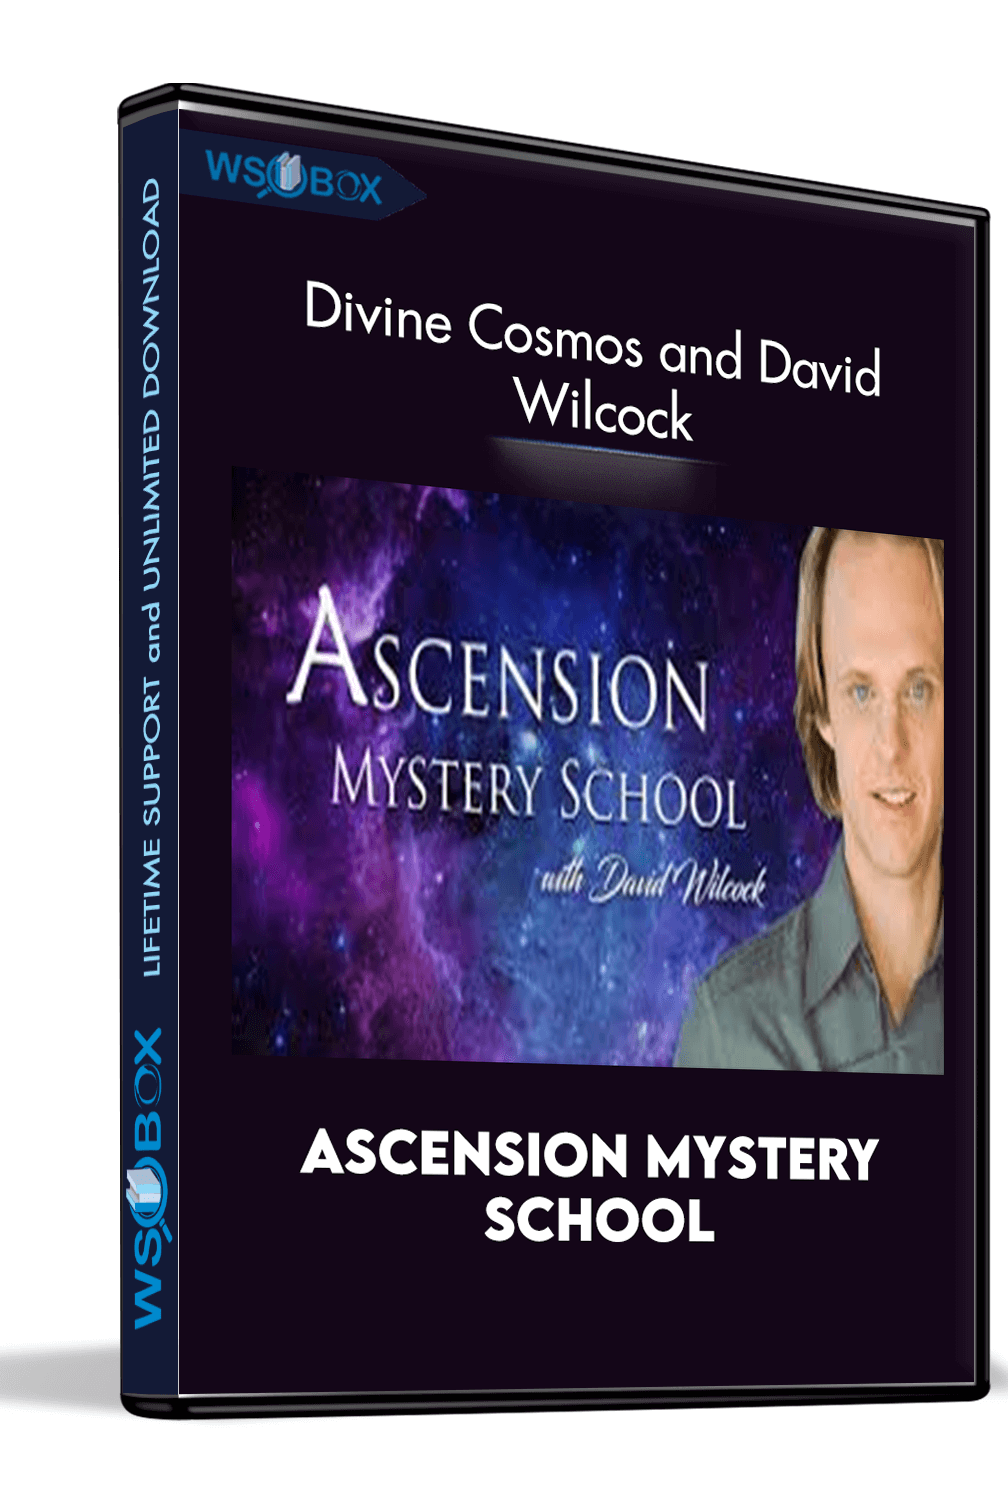 Ascension Mystery School - Divine Cosmos and David Wilcock